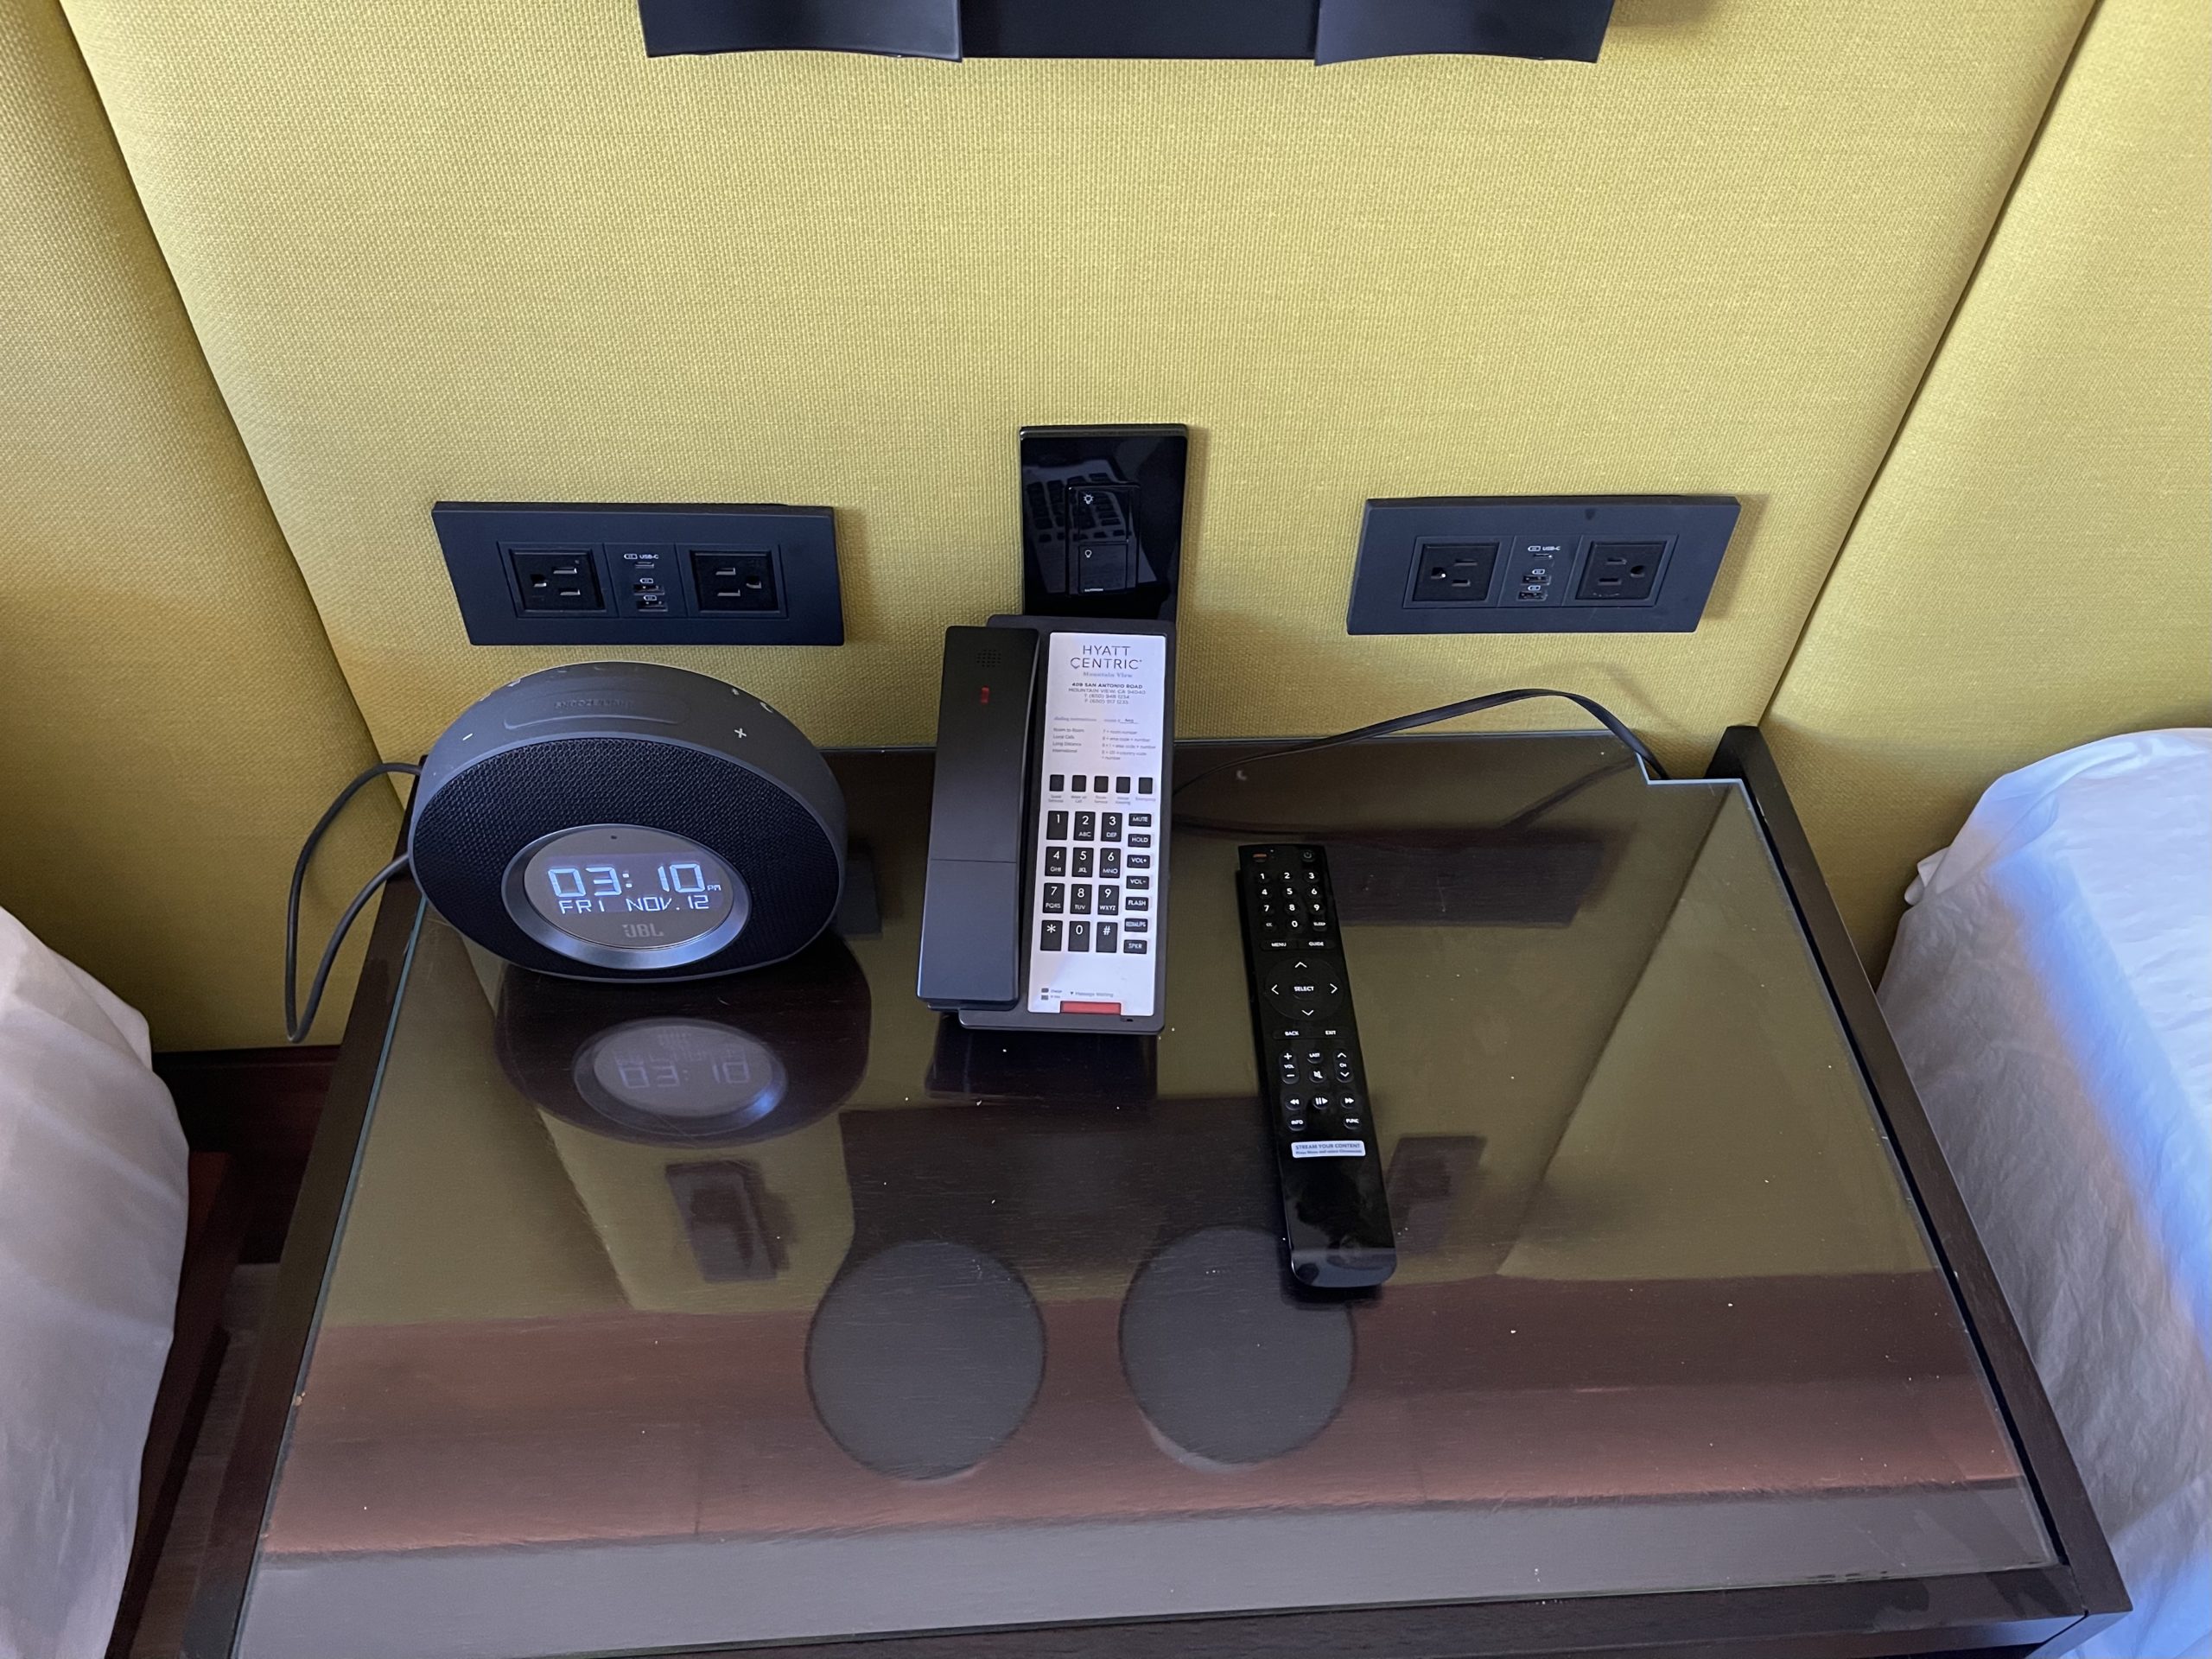 a phone and alarm clock on a table